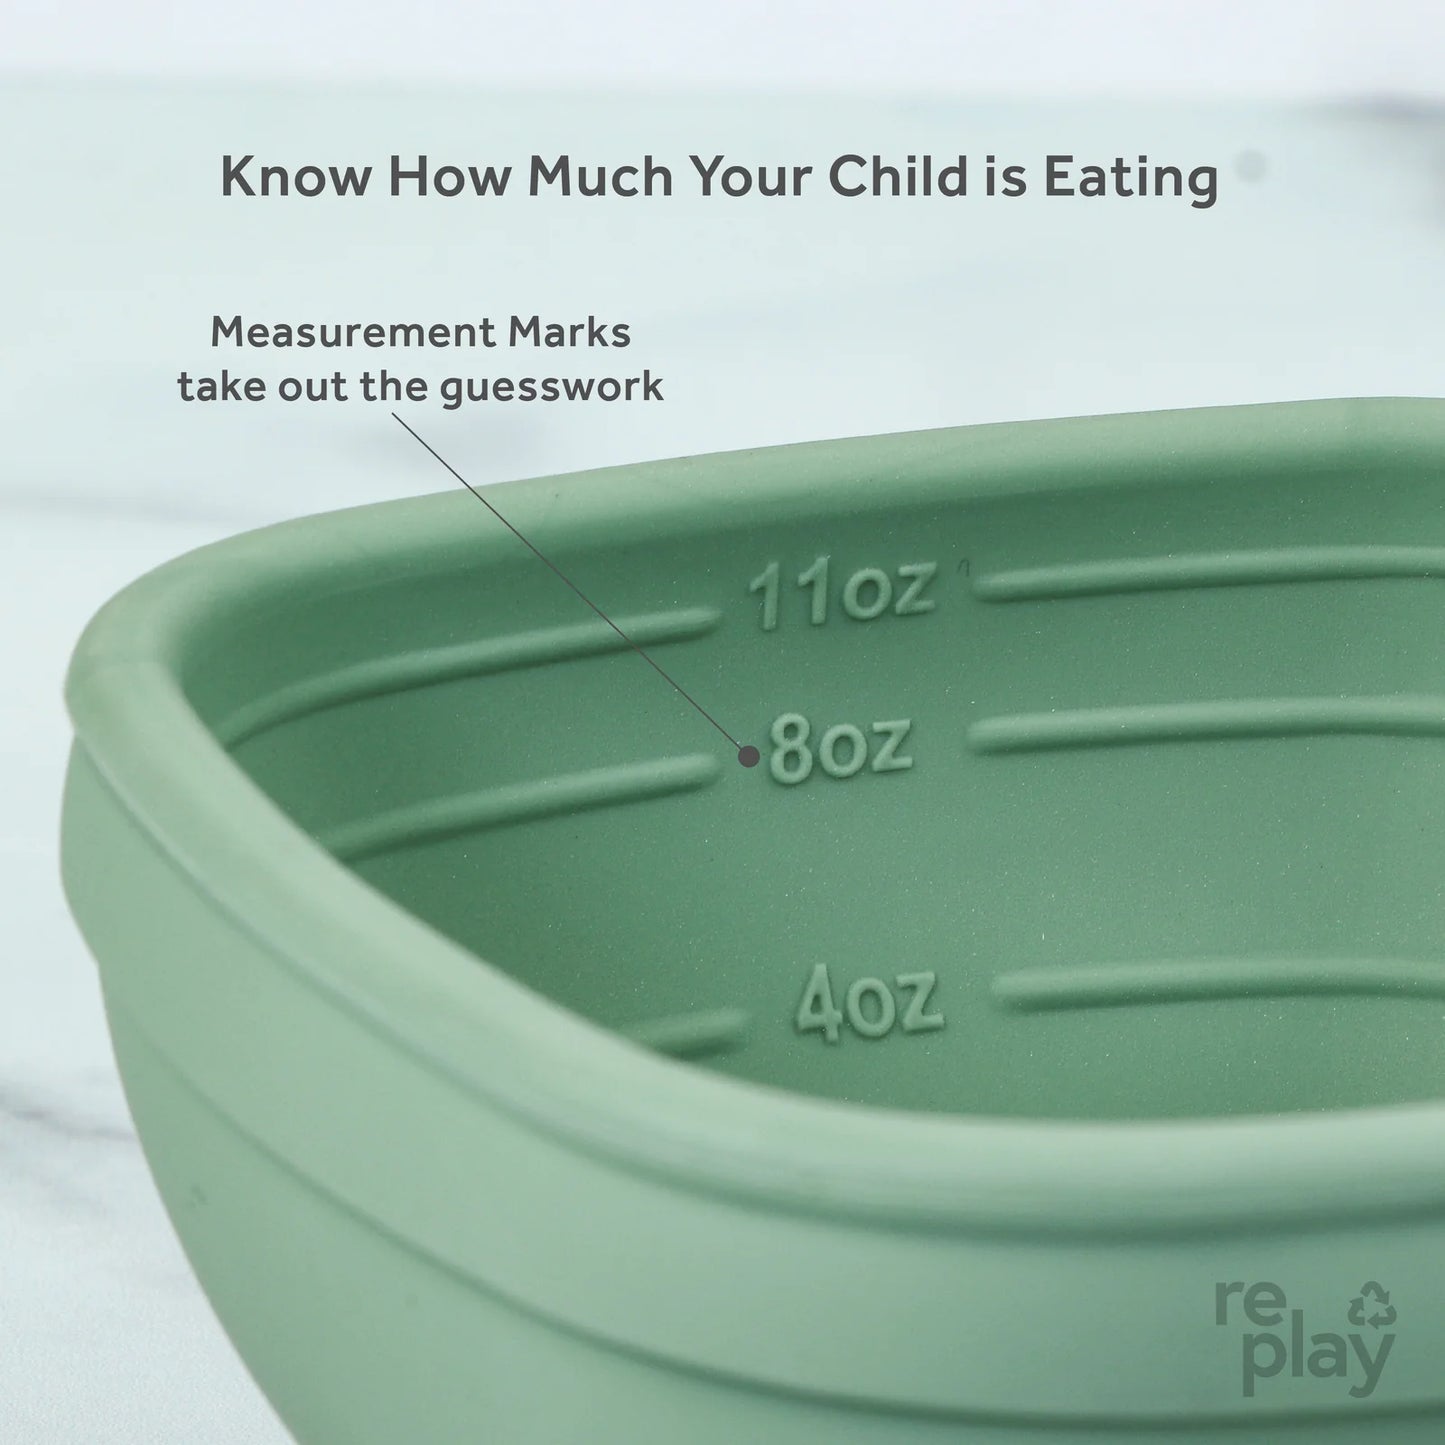 Silicone Suction Bowl with Press In Lid Green